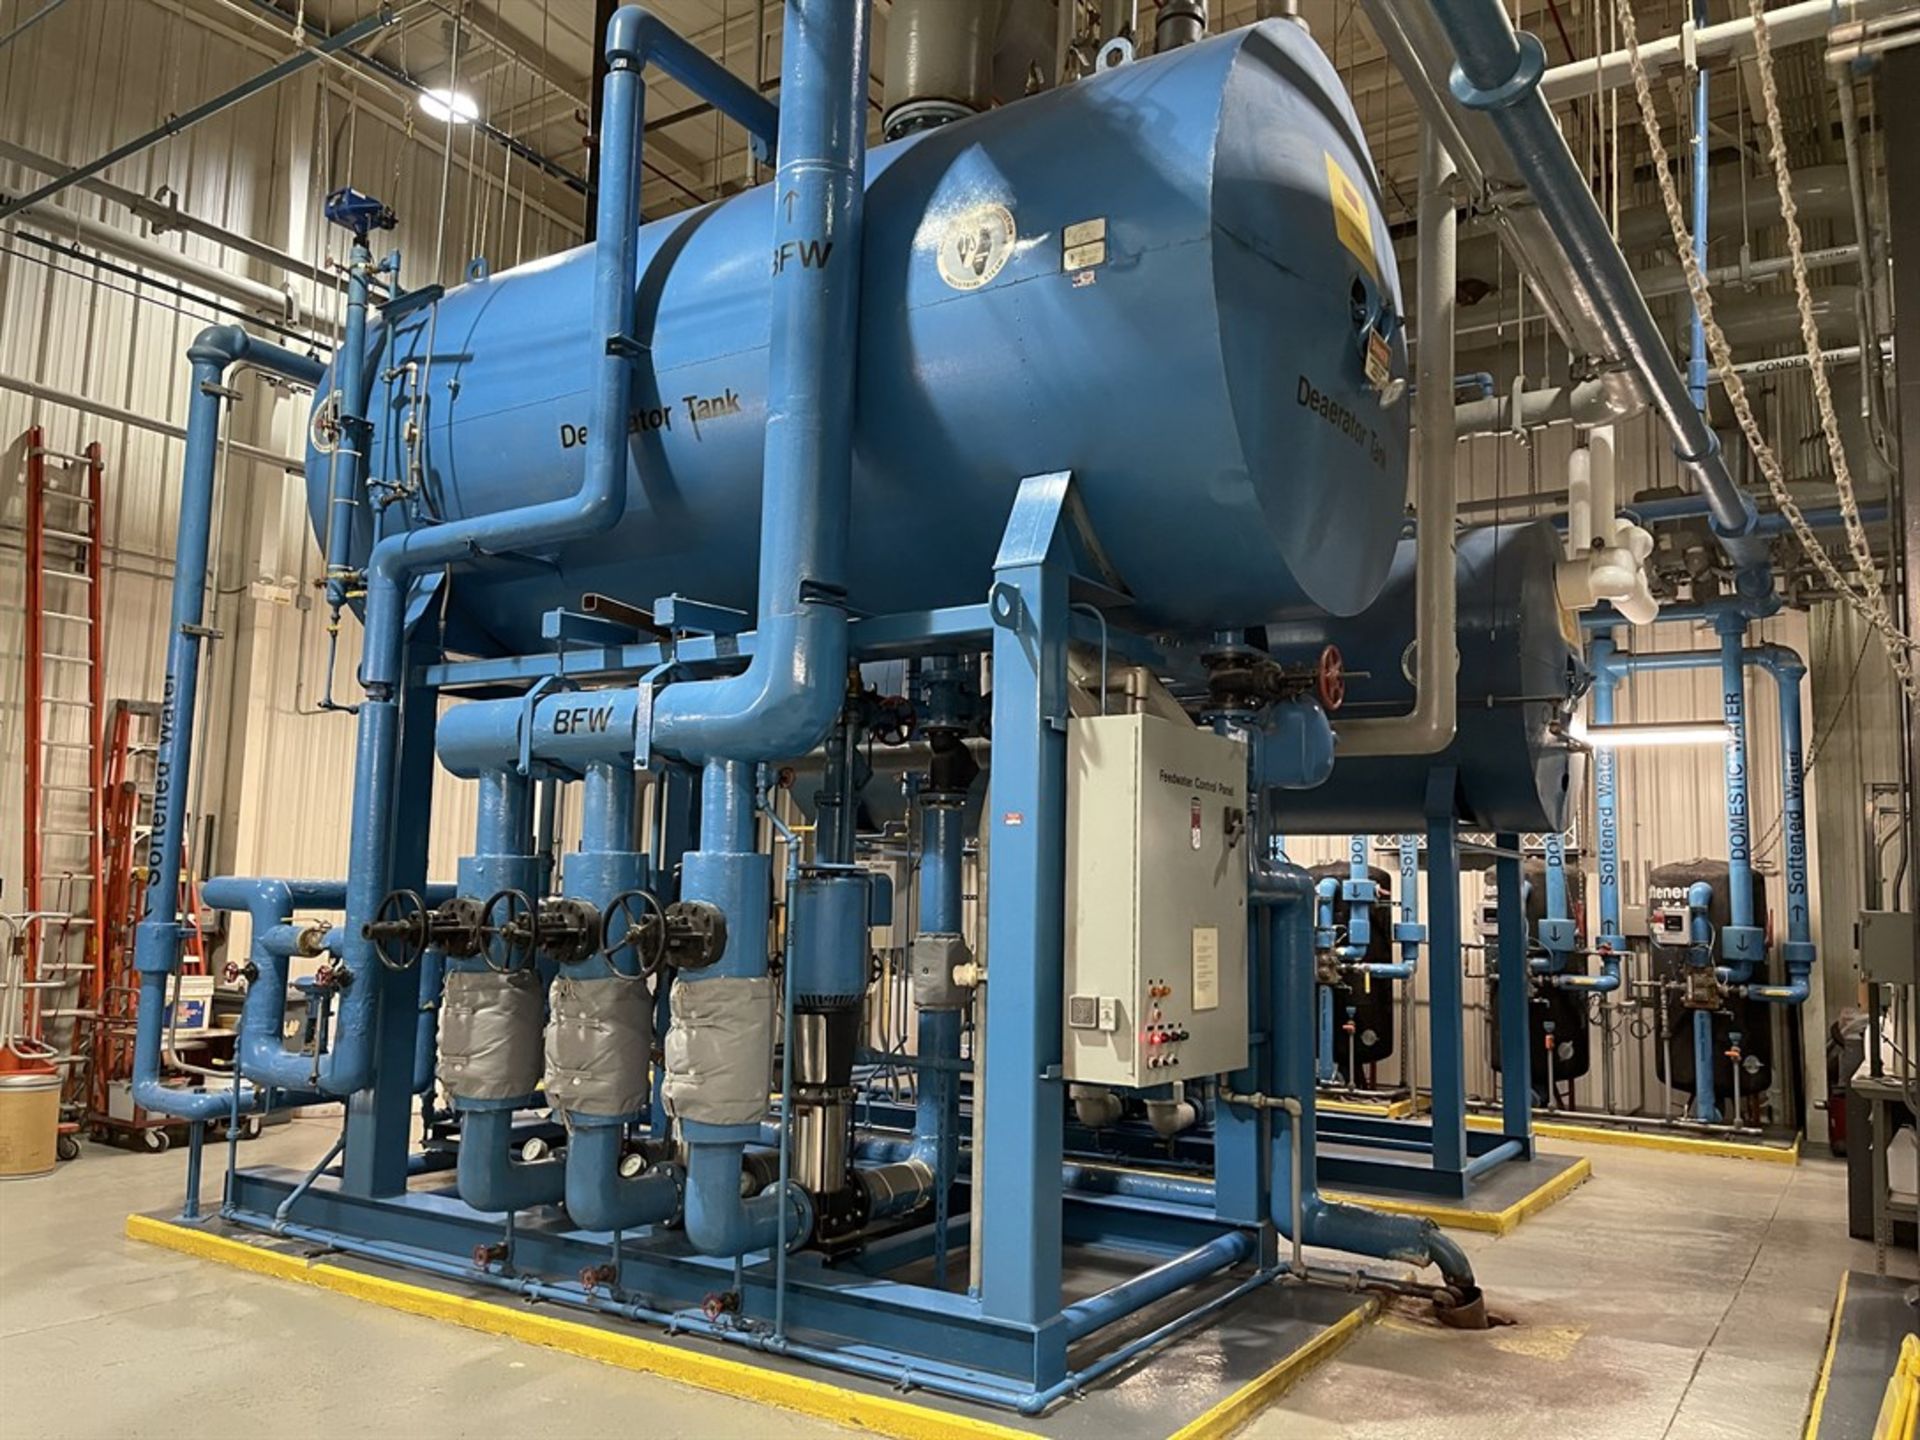 INDUSTRIAL STEAM Complete Boiler Water Treatment and Feed System Featuring Deaerator and Feed